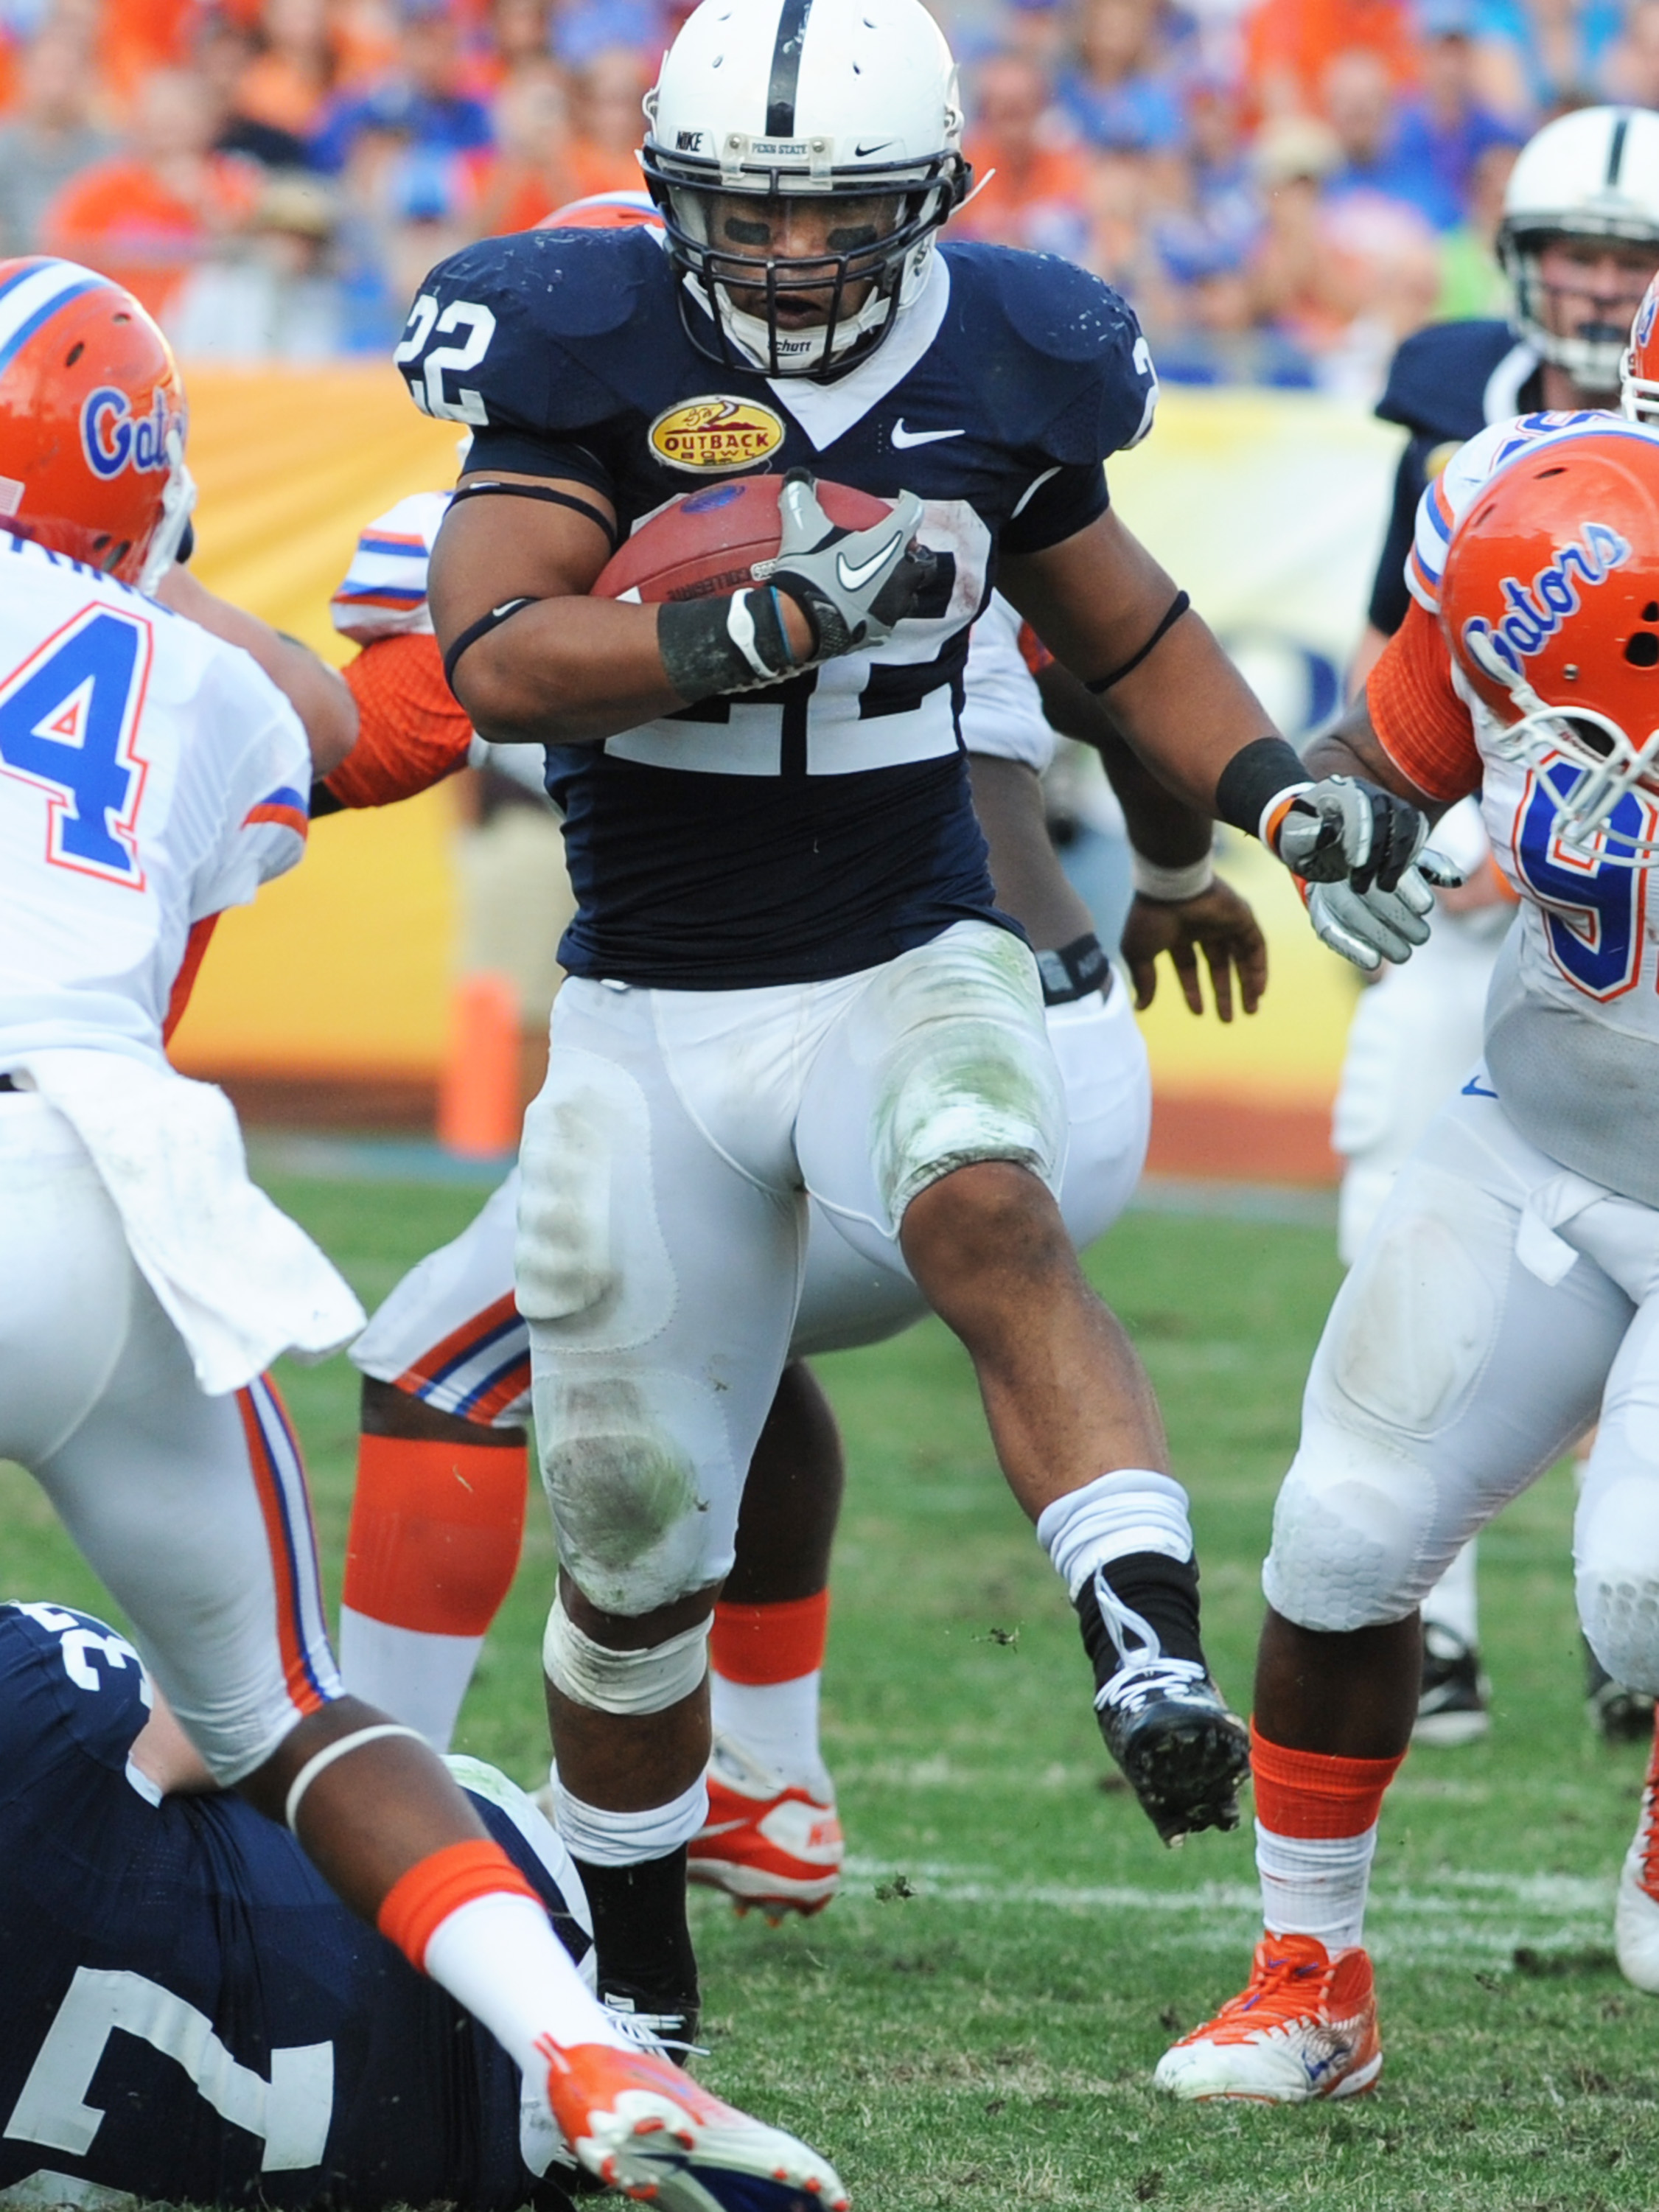 TAMPA, FL - JANUARY 1:  Running back Evan Royster #22 of the Penn State Nittany Lions rushes upfield against the Florida Gators January 1, 2010 in the 25th Outback Bowl at Raymond James Stadium in Tampa, Florida.  (Photo by Al Messerschmidt/Getty Images)